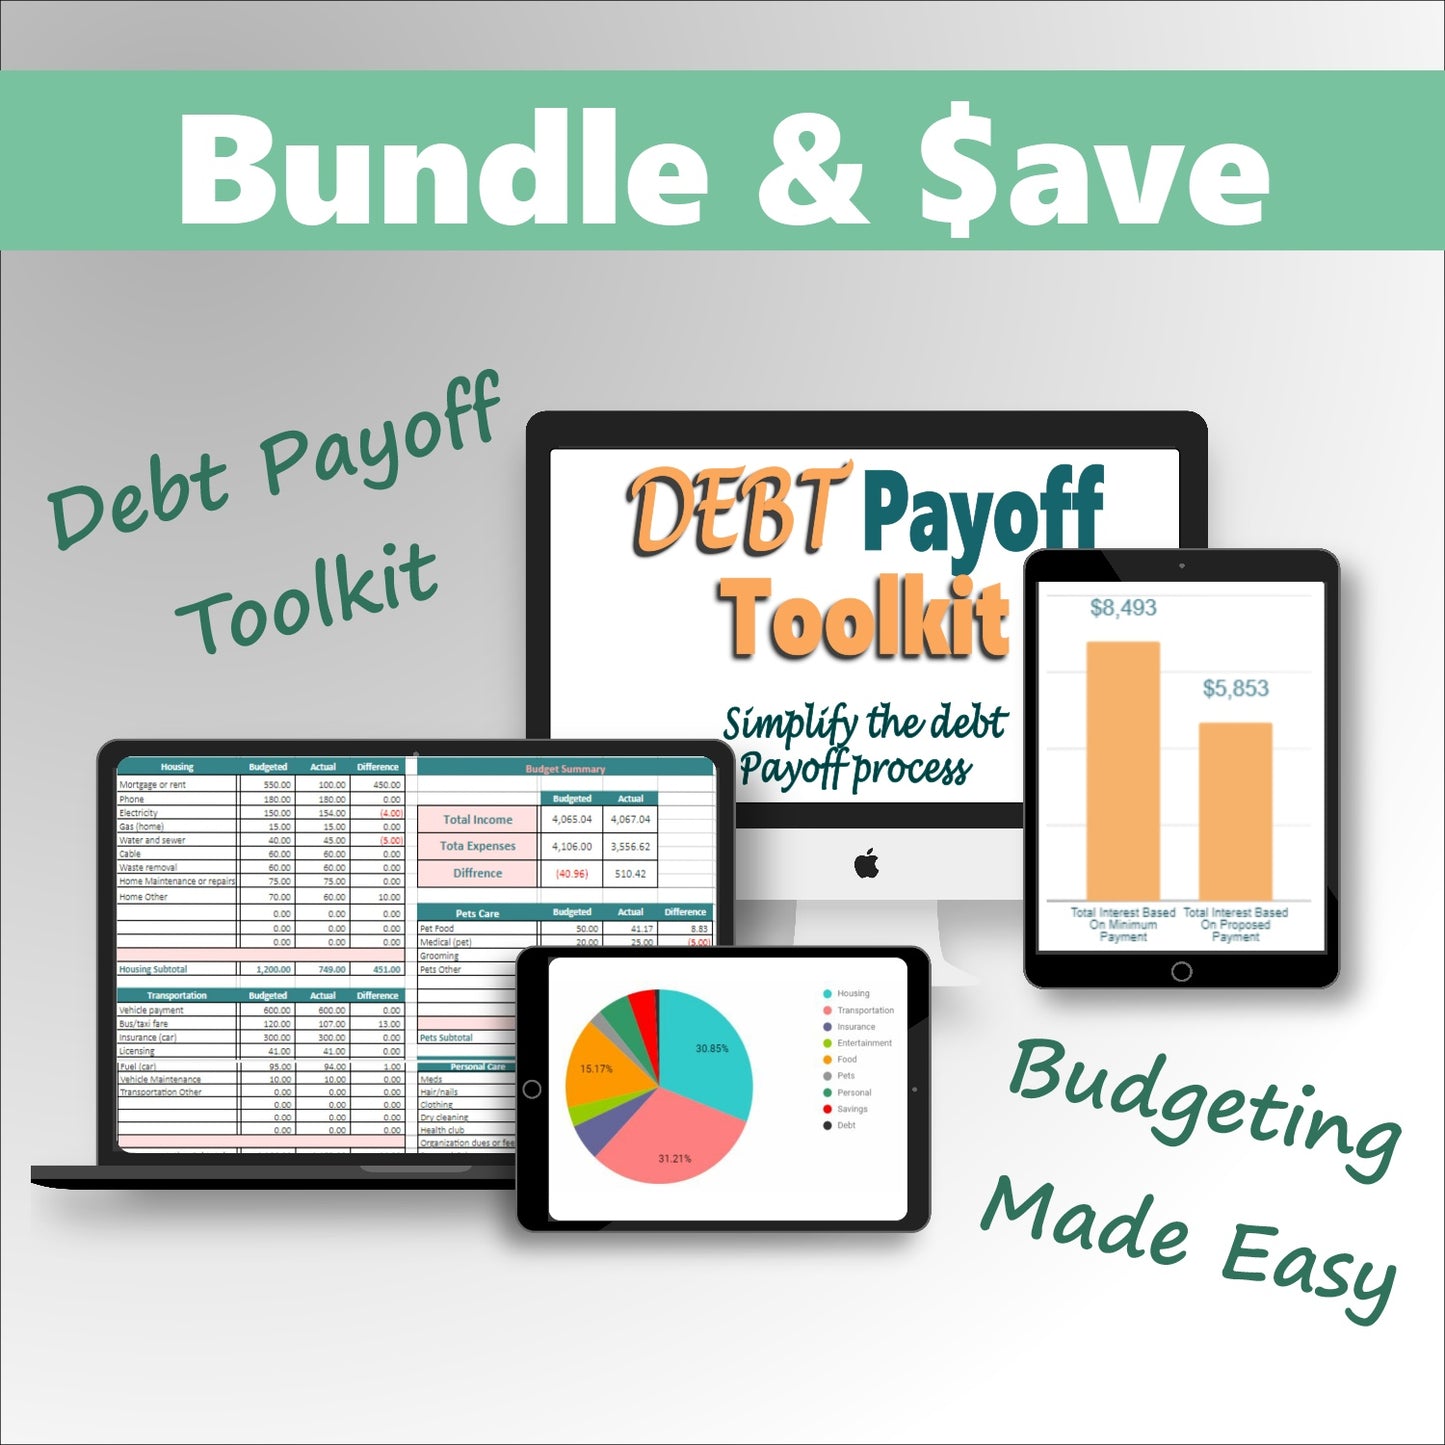 Budgeting Made Easy & Debt Payoff Toolkit Bundle